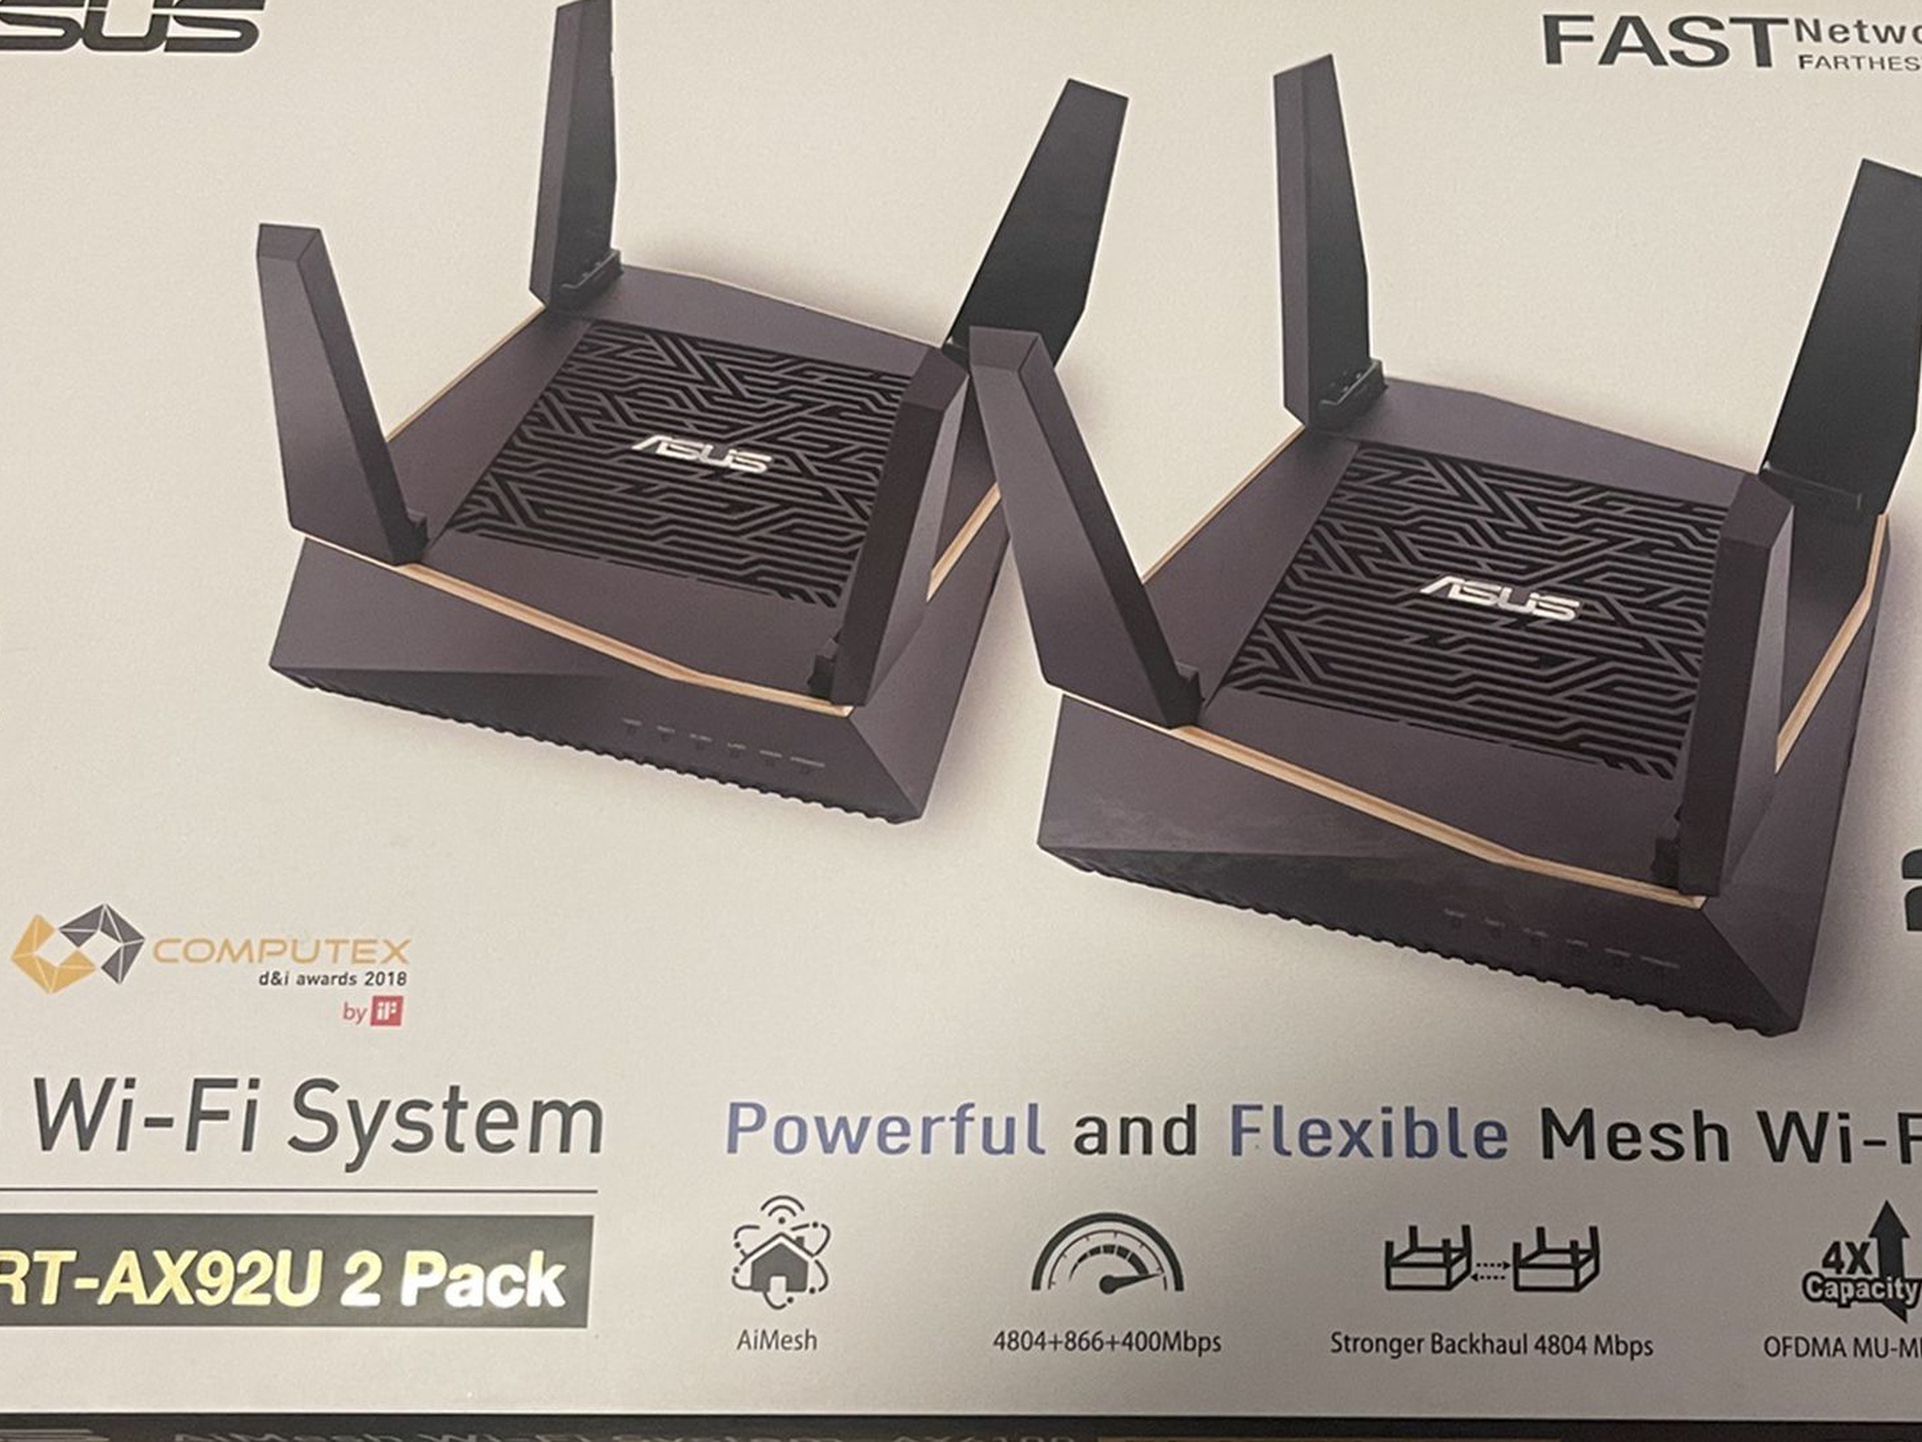 ASUS RT-AX6100 Tri-band WiFi-6 Gigabit Mesh Router System